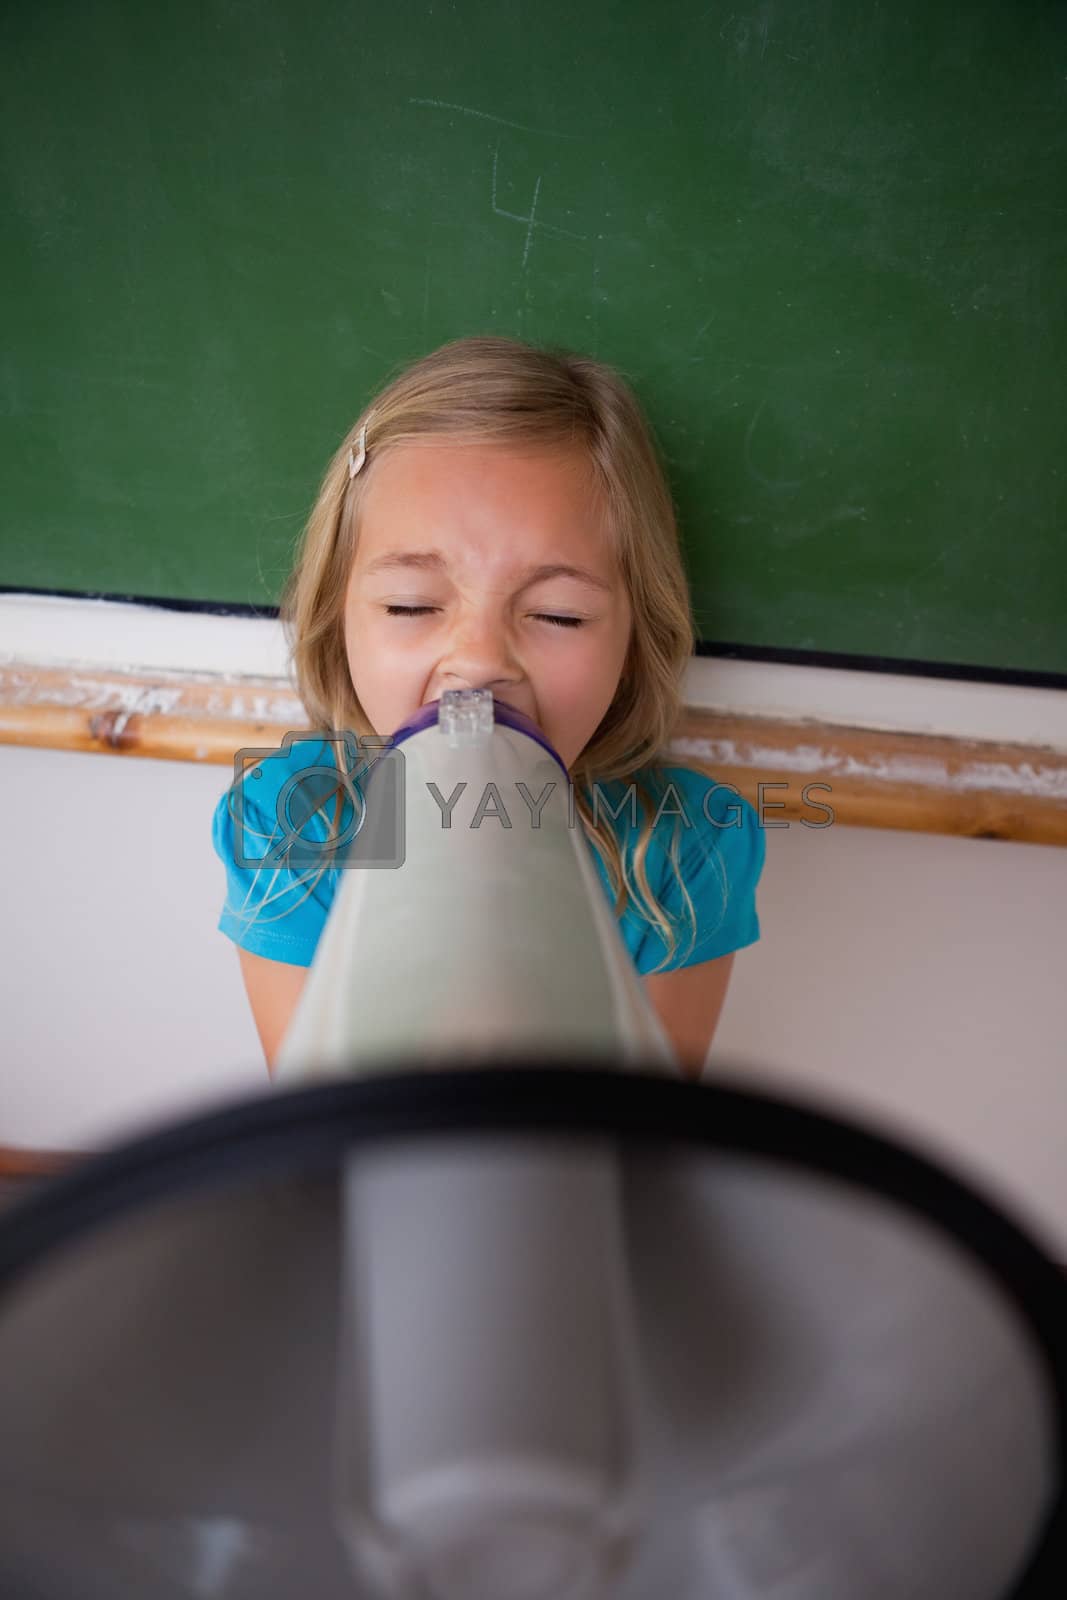 Royalty free image of Portrait of an angry schoolgirl screaming through a megaphone by Wavebreakmedia